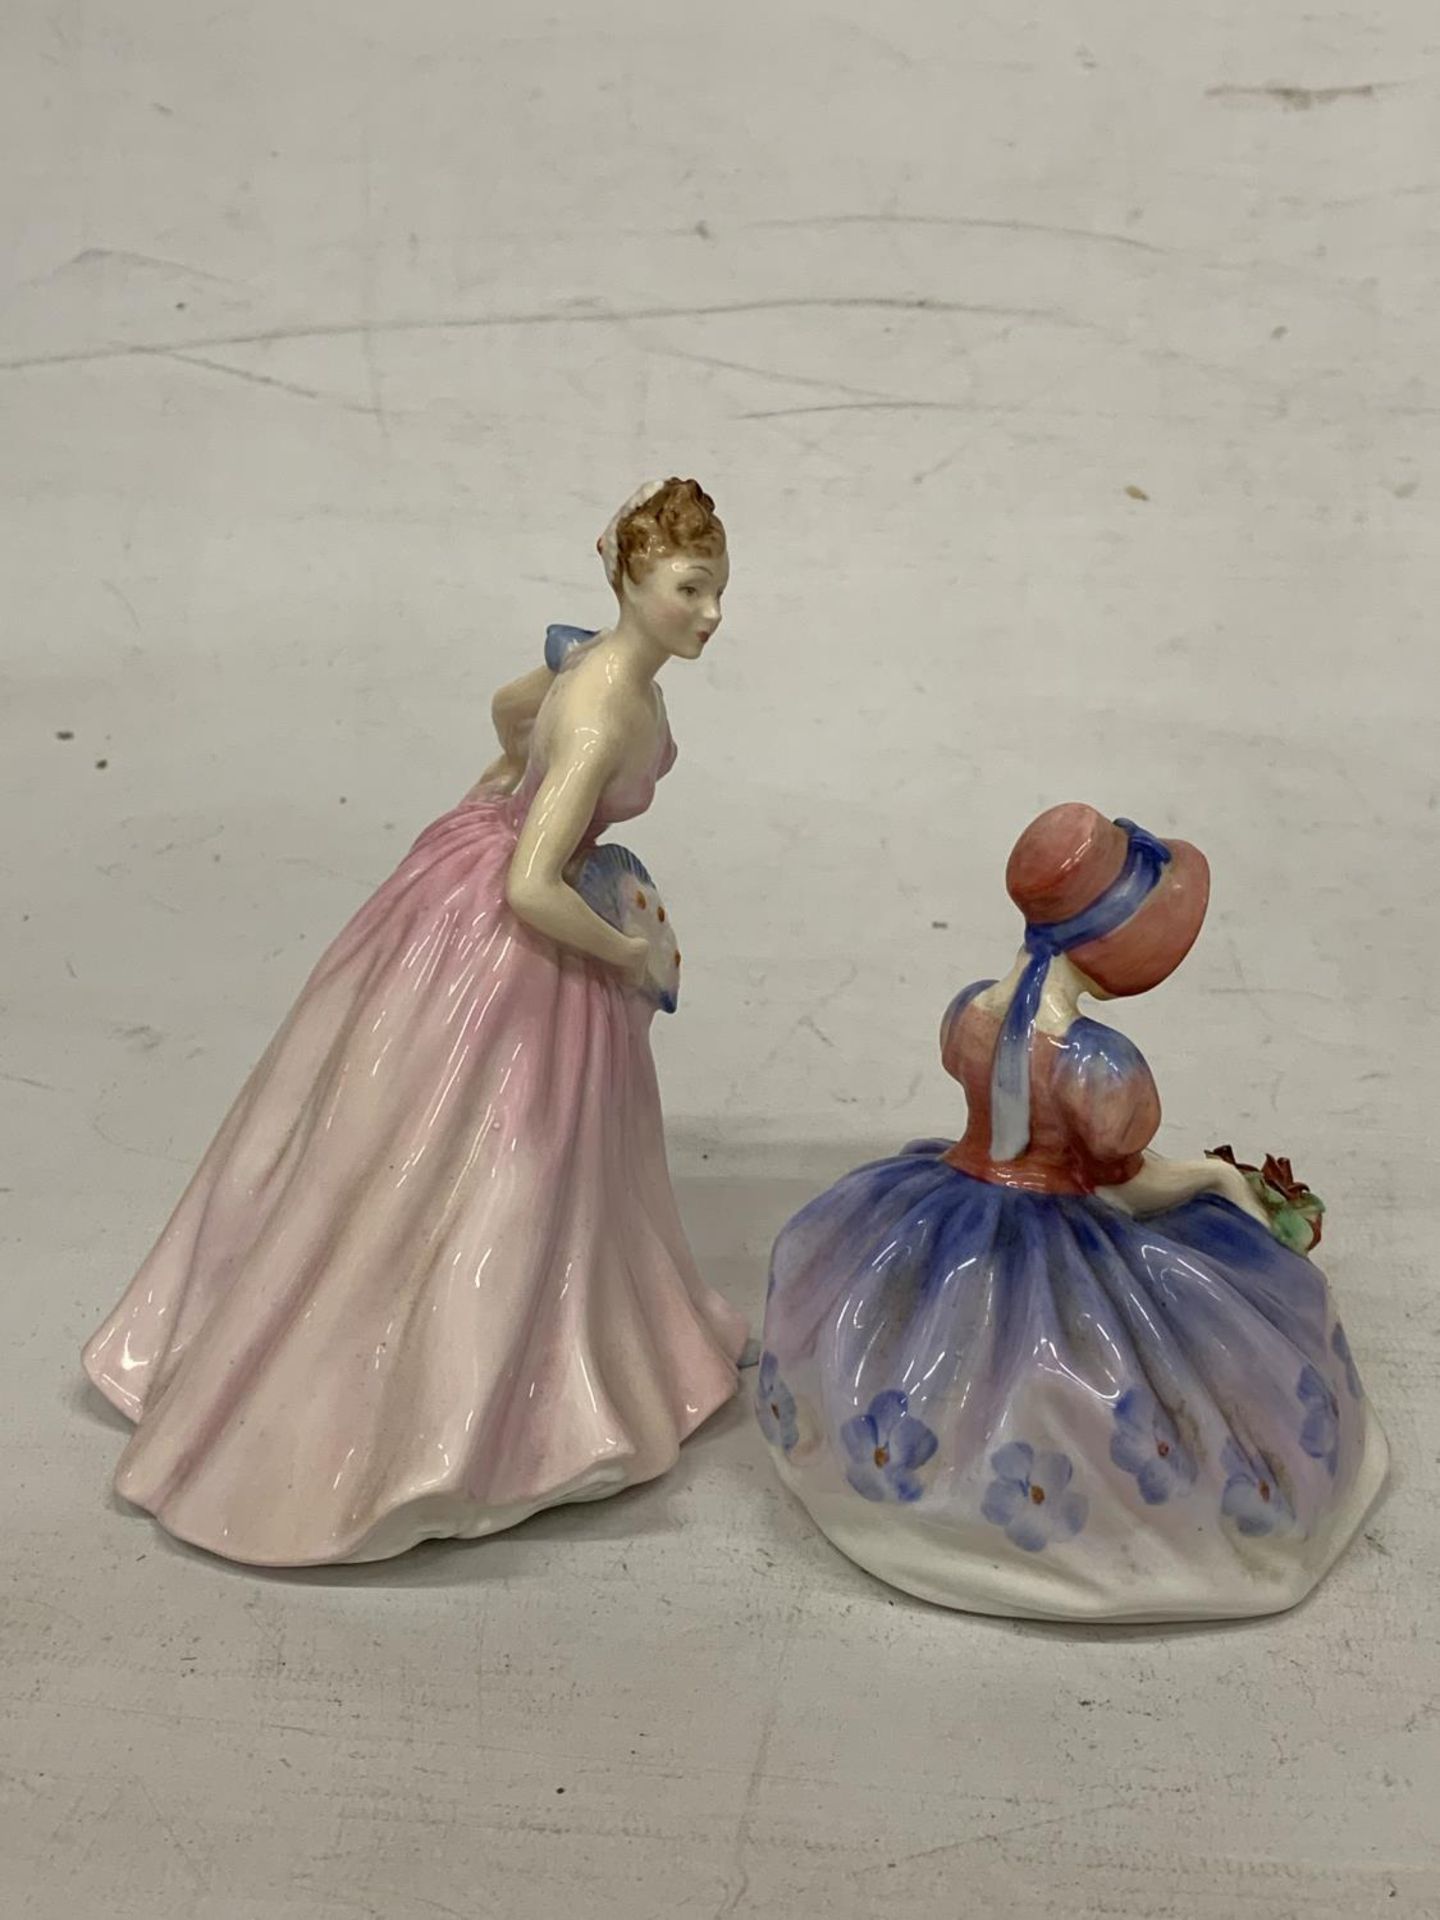 TWO ROYAL DOULTON FIGURINES "INVITATION" HN 2170 AND "MONICA" HN 1467 - Image 2 of 4